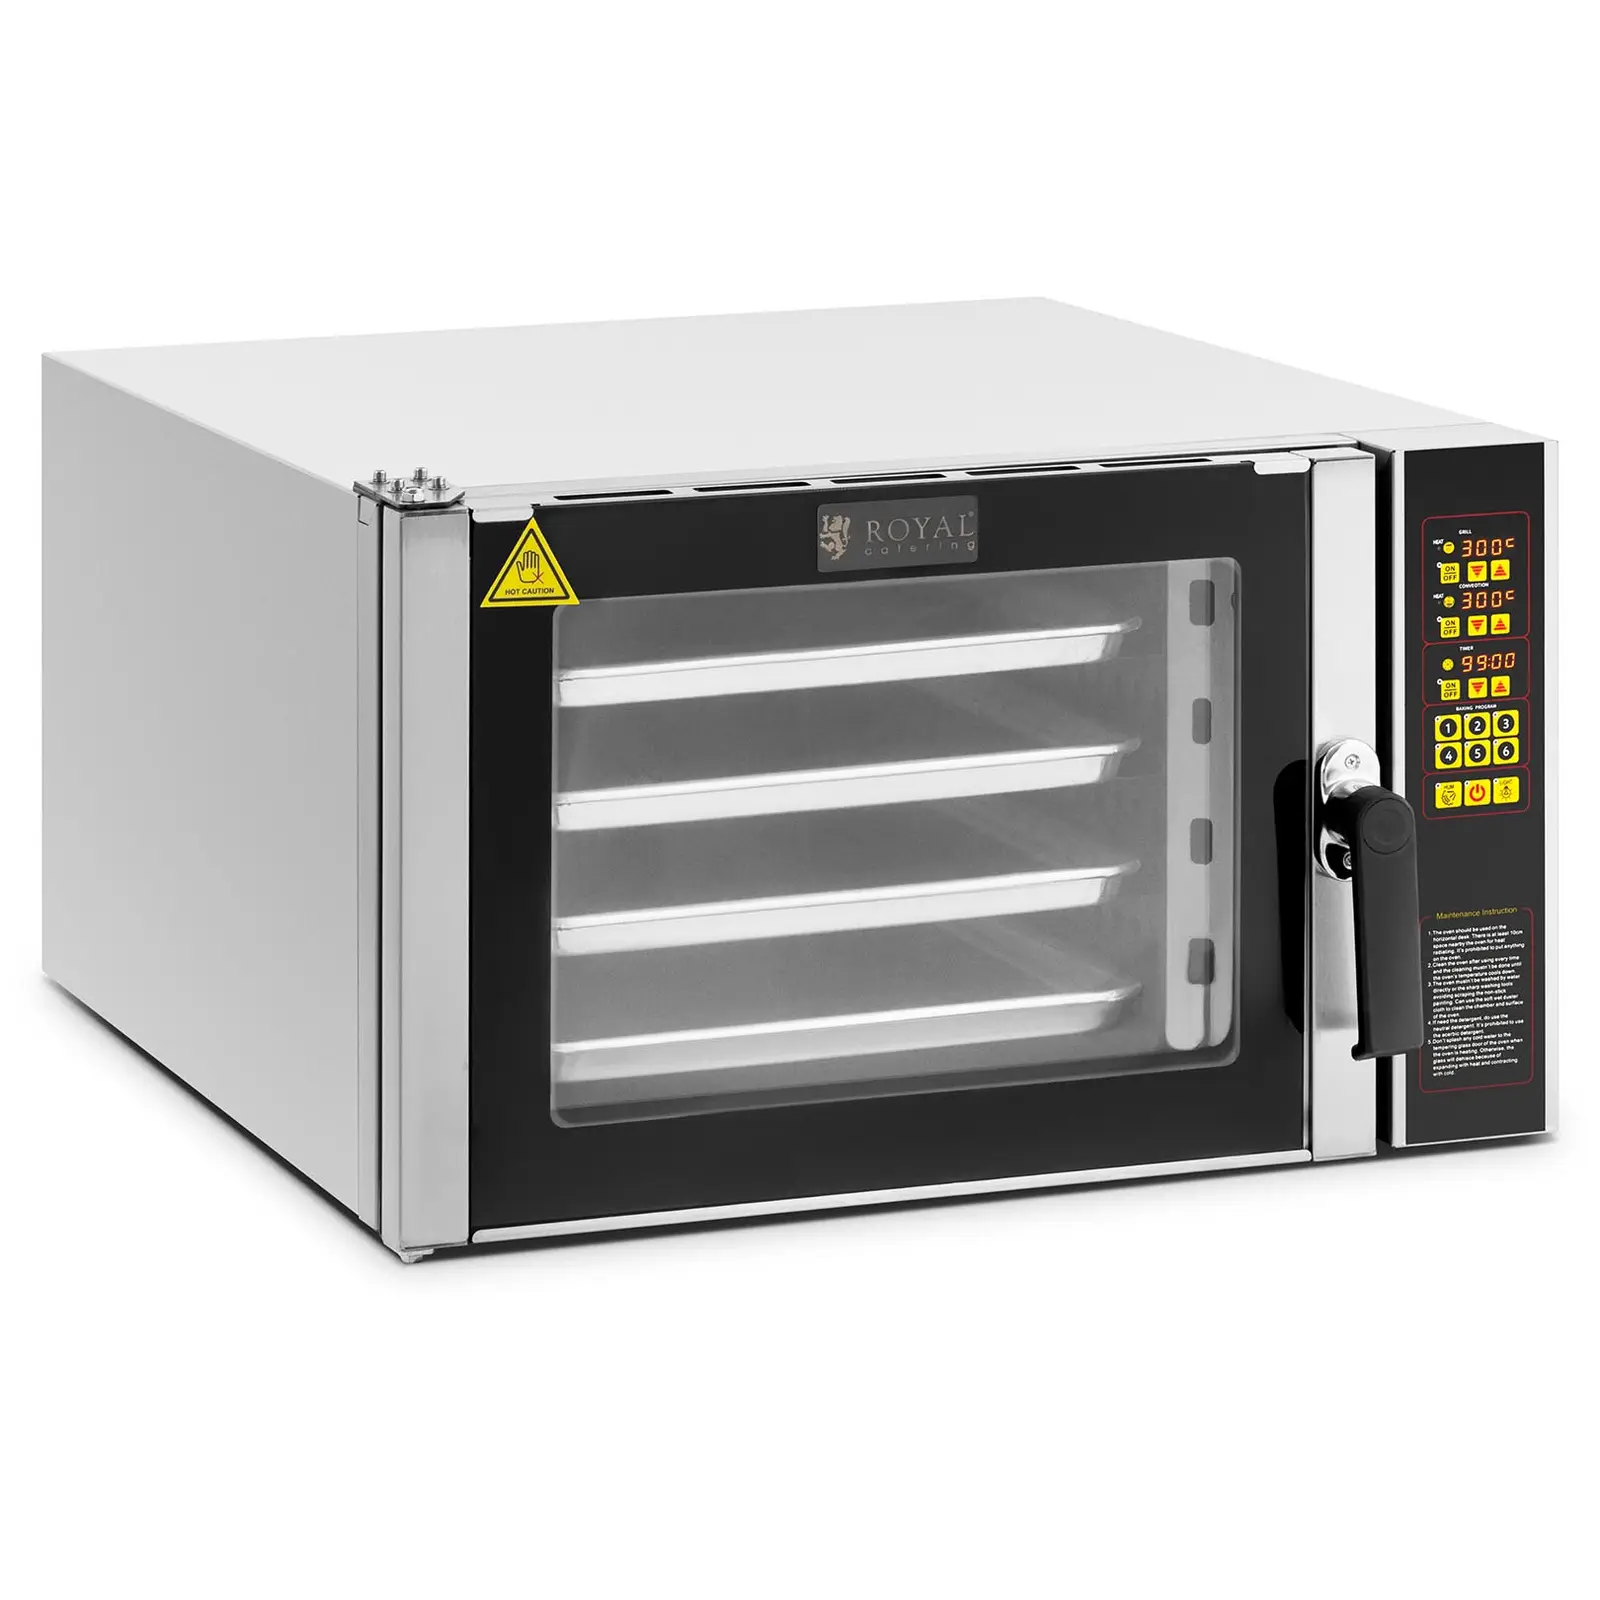 Hot air oven - 5000 W - Timer - Steam function - 4 Trays